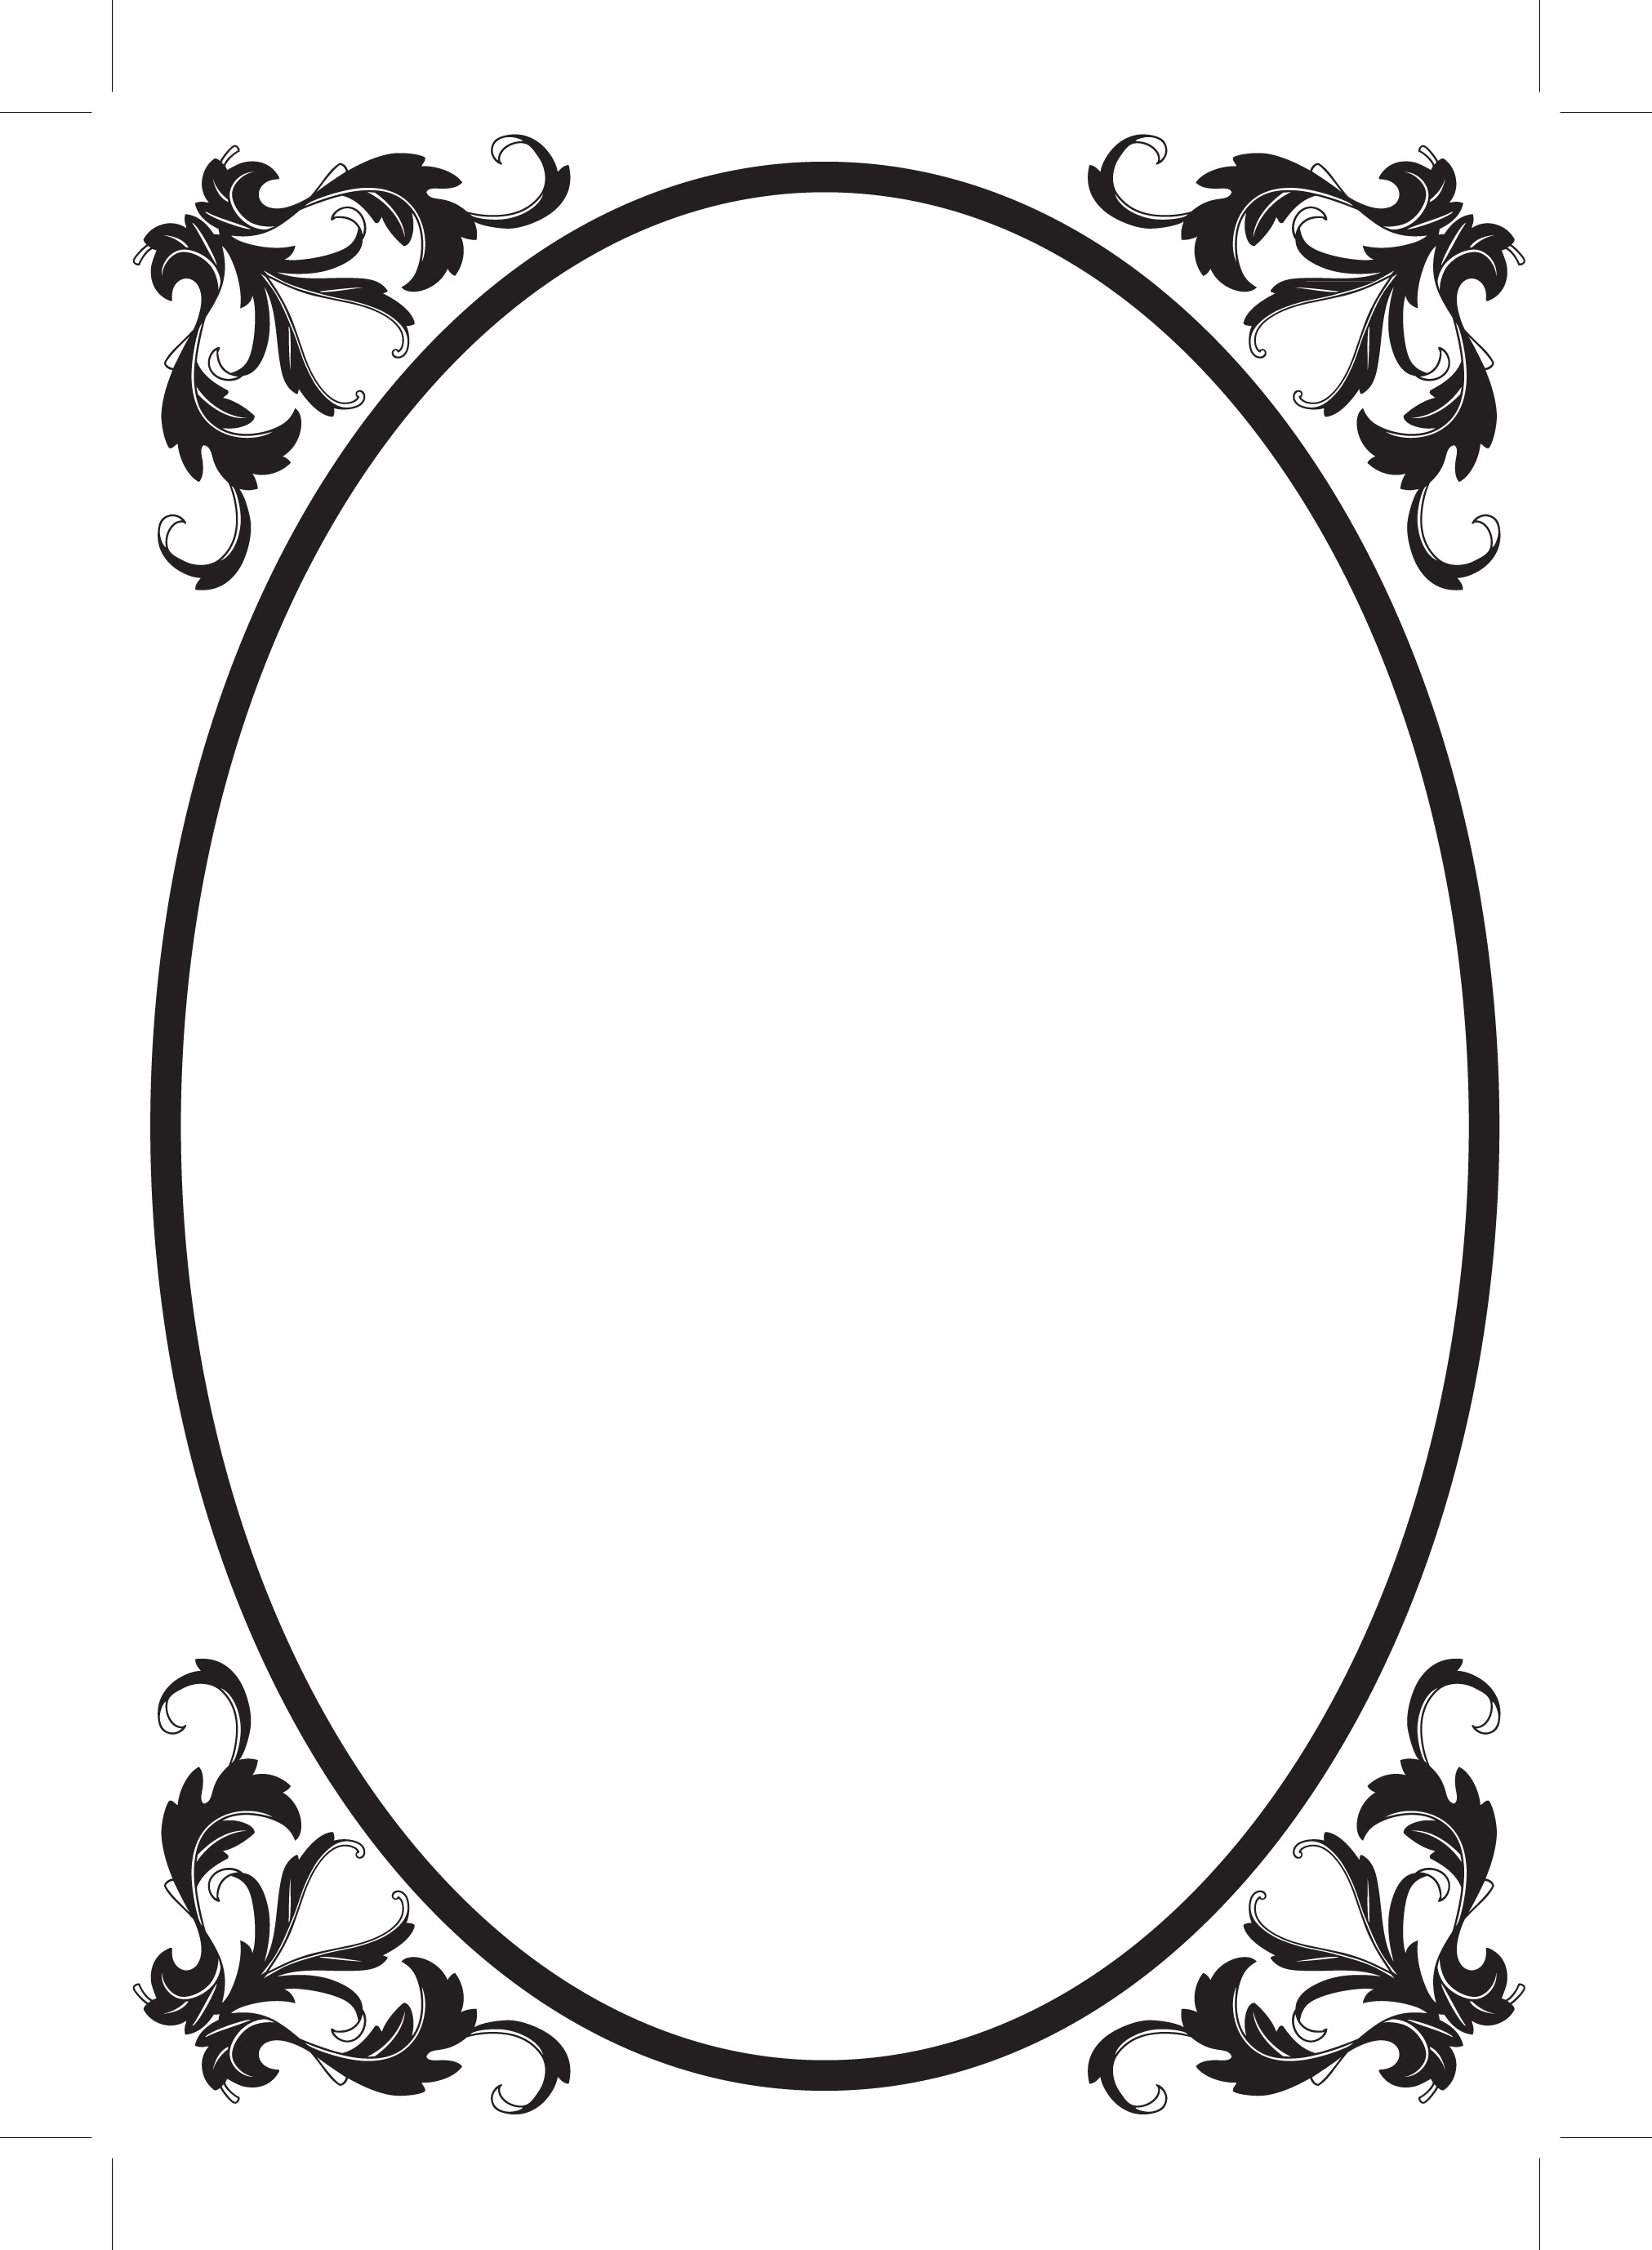 free-oval-frame-cliparts-download-free-oval-frame-cliparts-png-images-free-cliparts-on-clipart